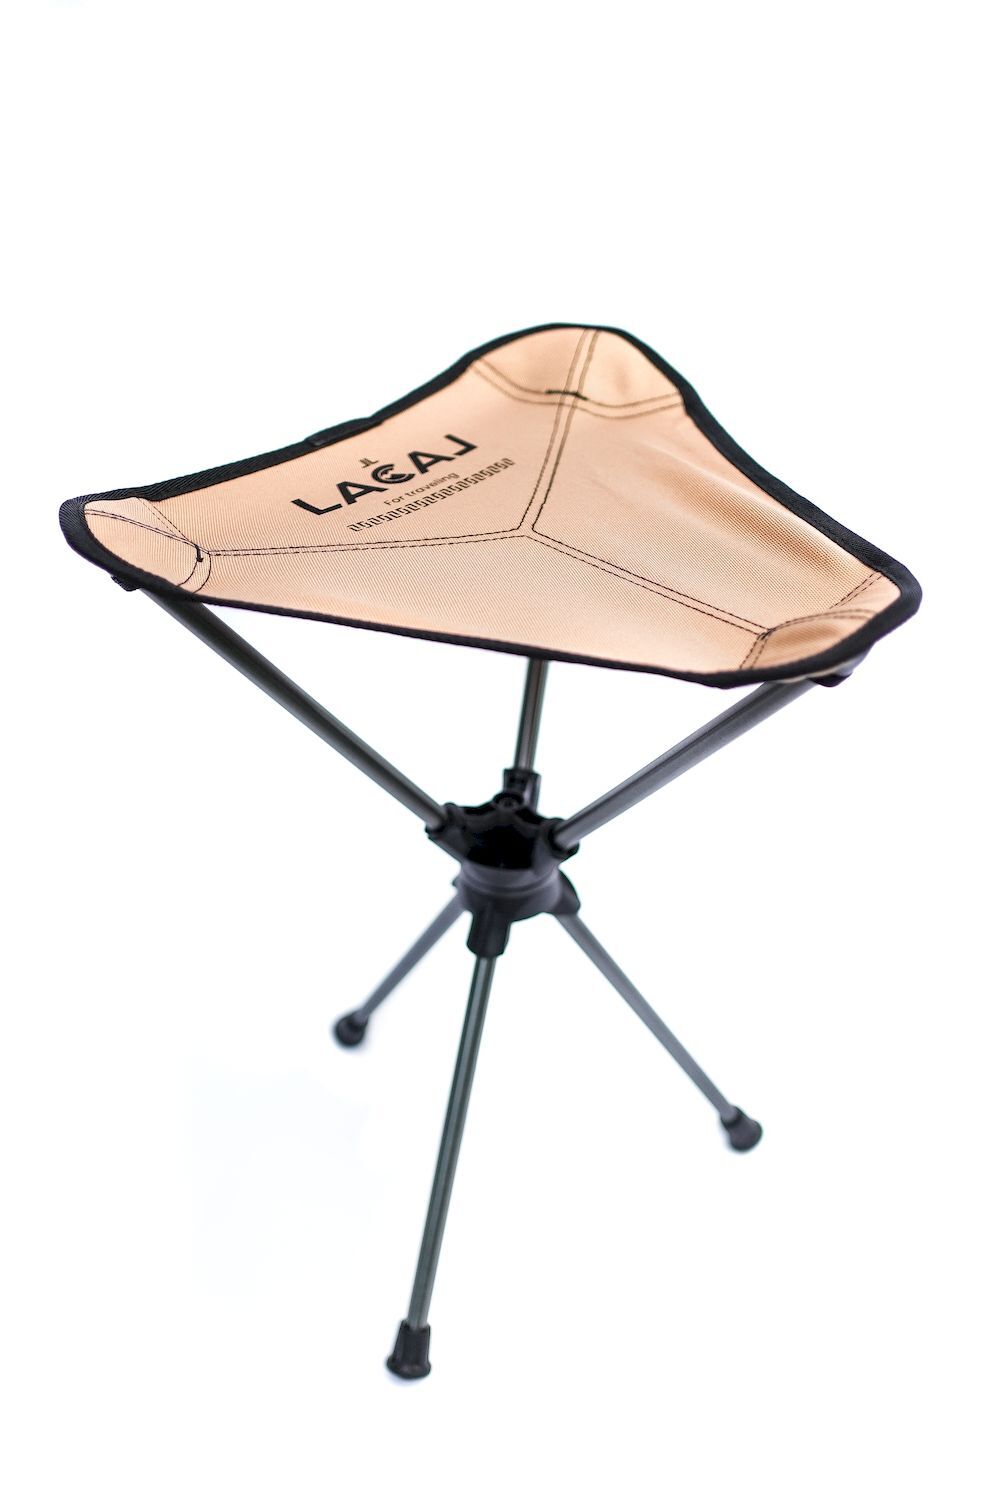 Lacal Nomad Stool - Chaise de camping | Hardloop